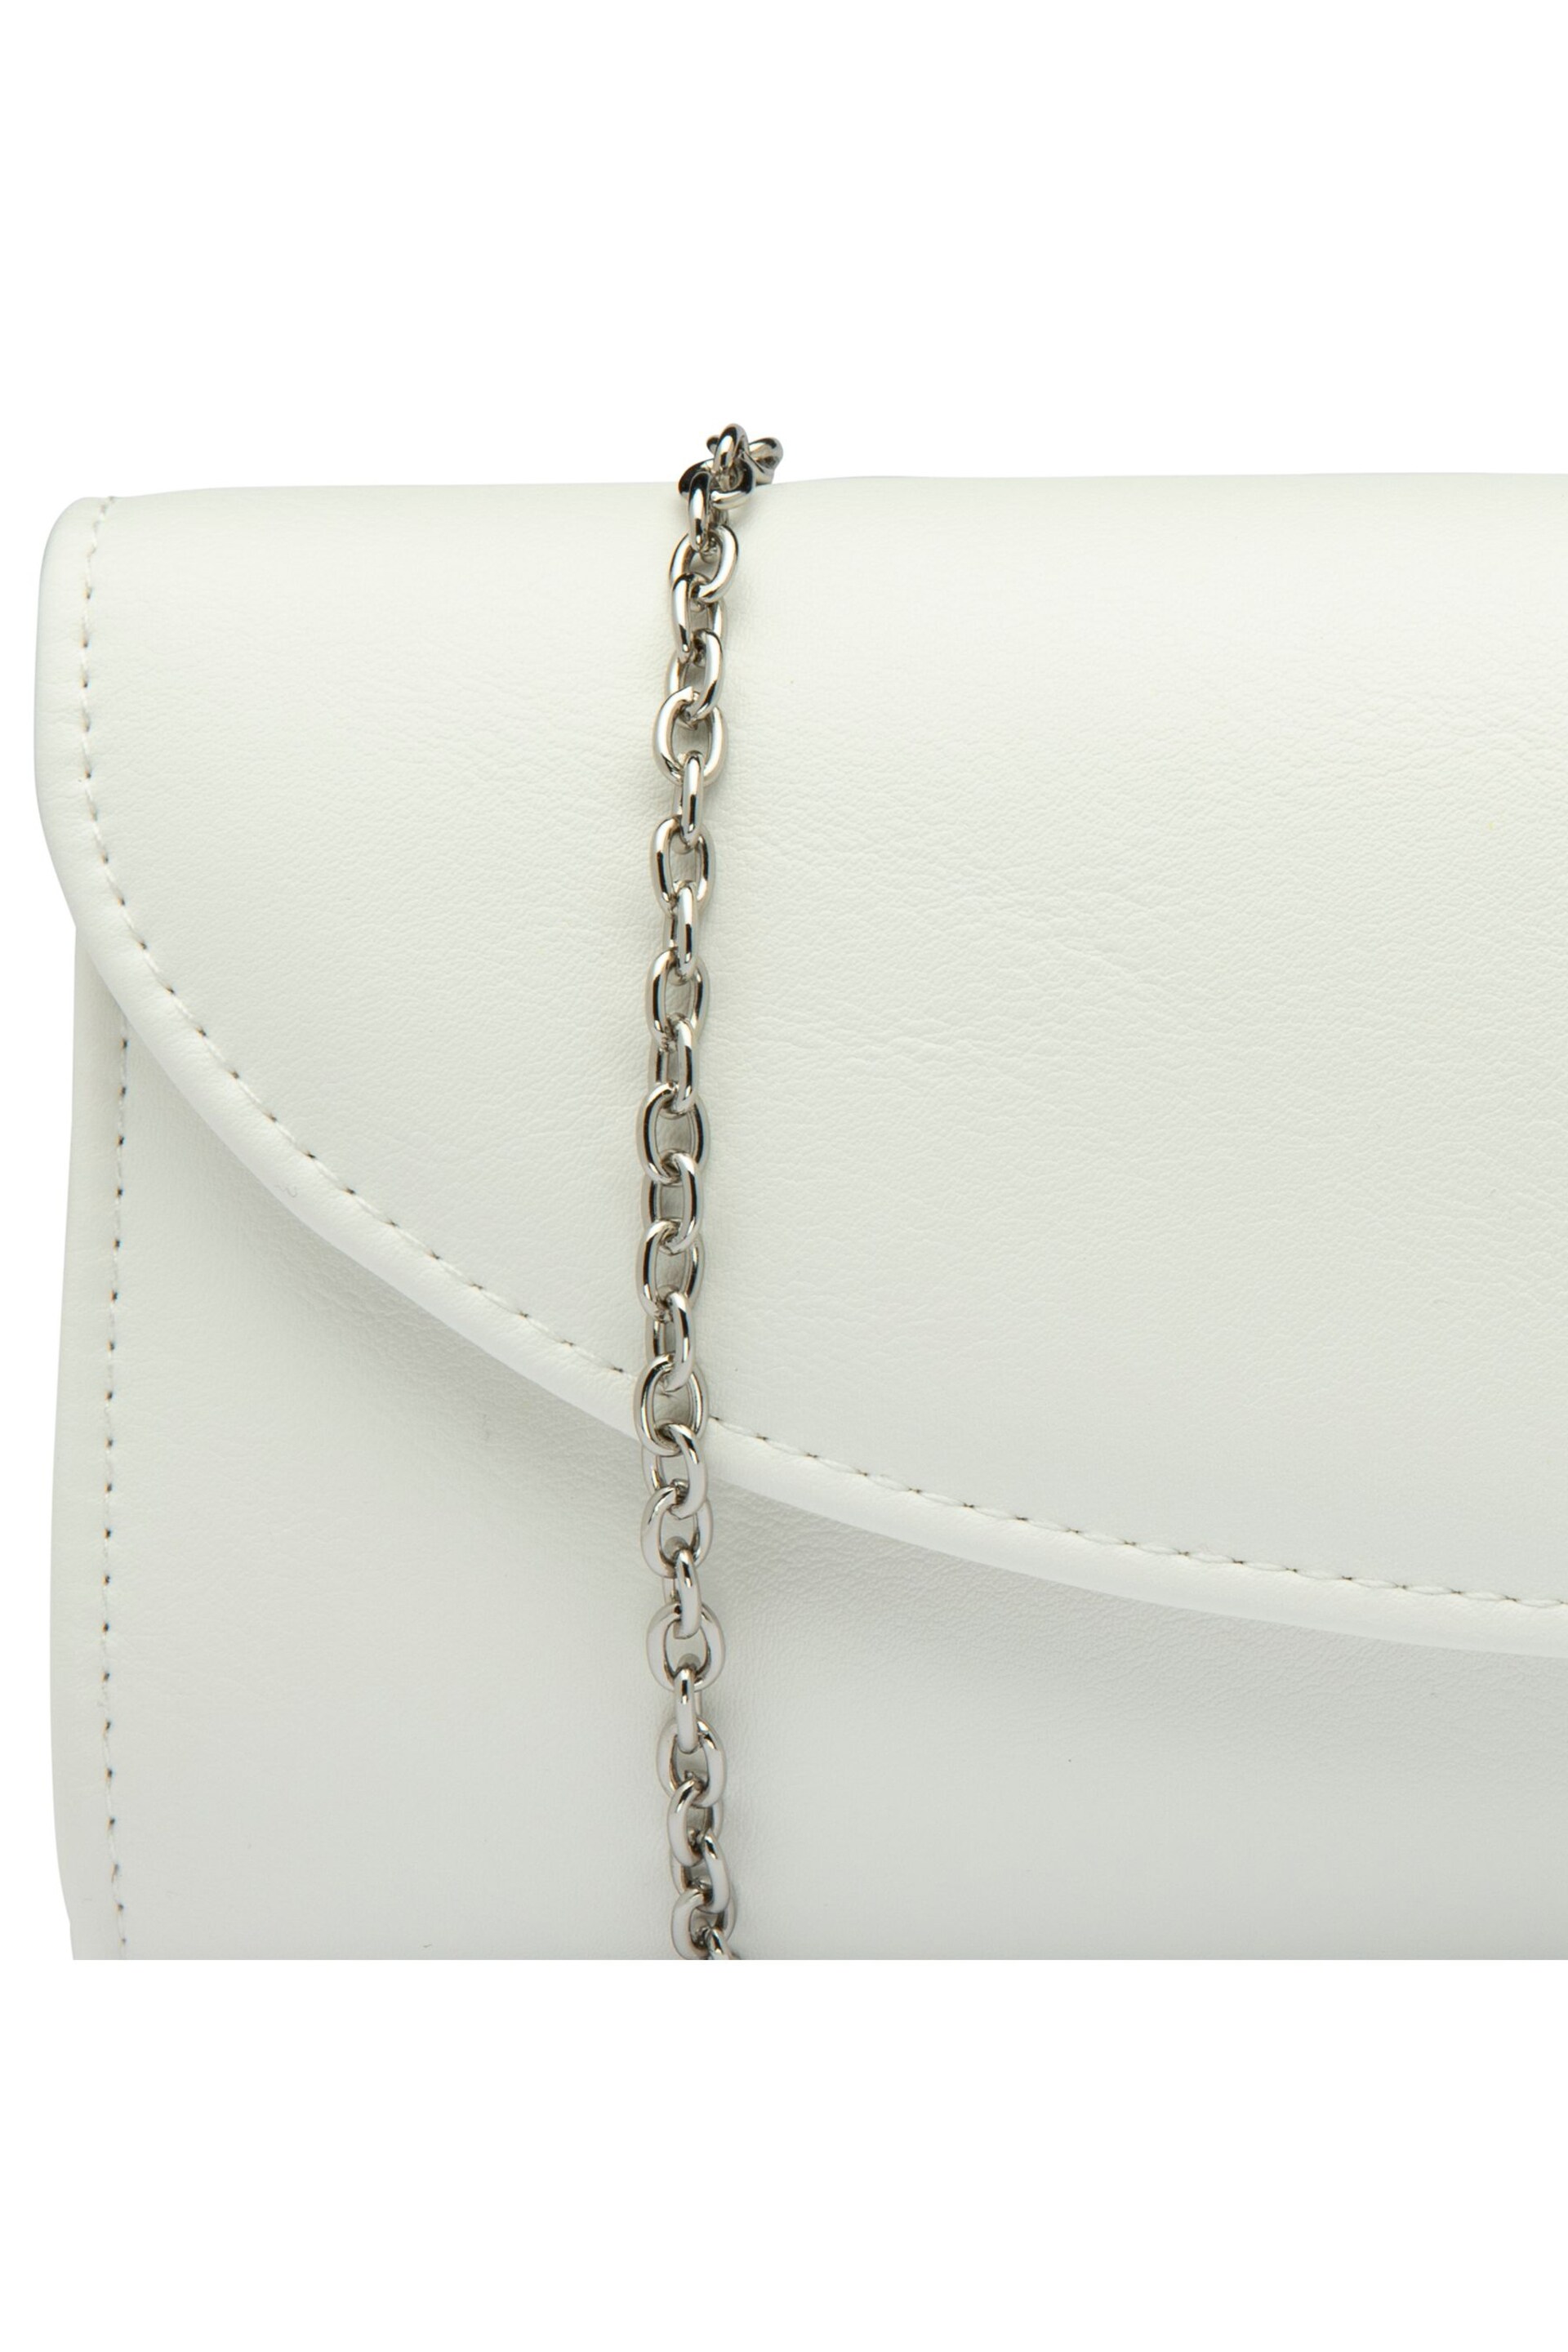 Lotus White Clutch Bag with Chain - Image 3 of 4